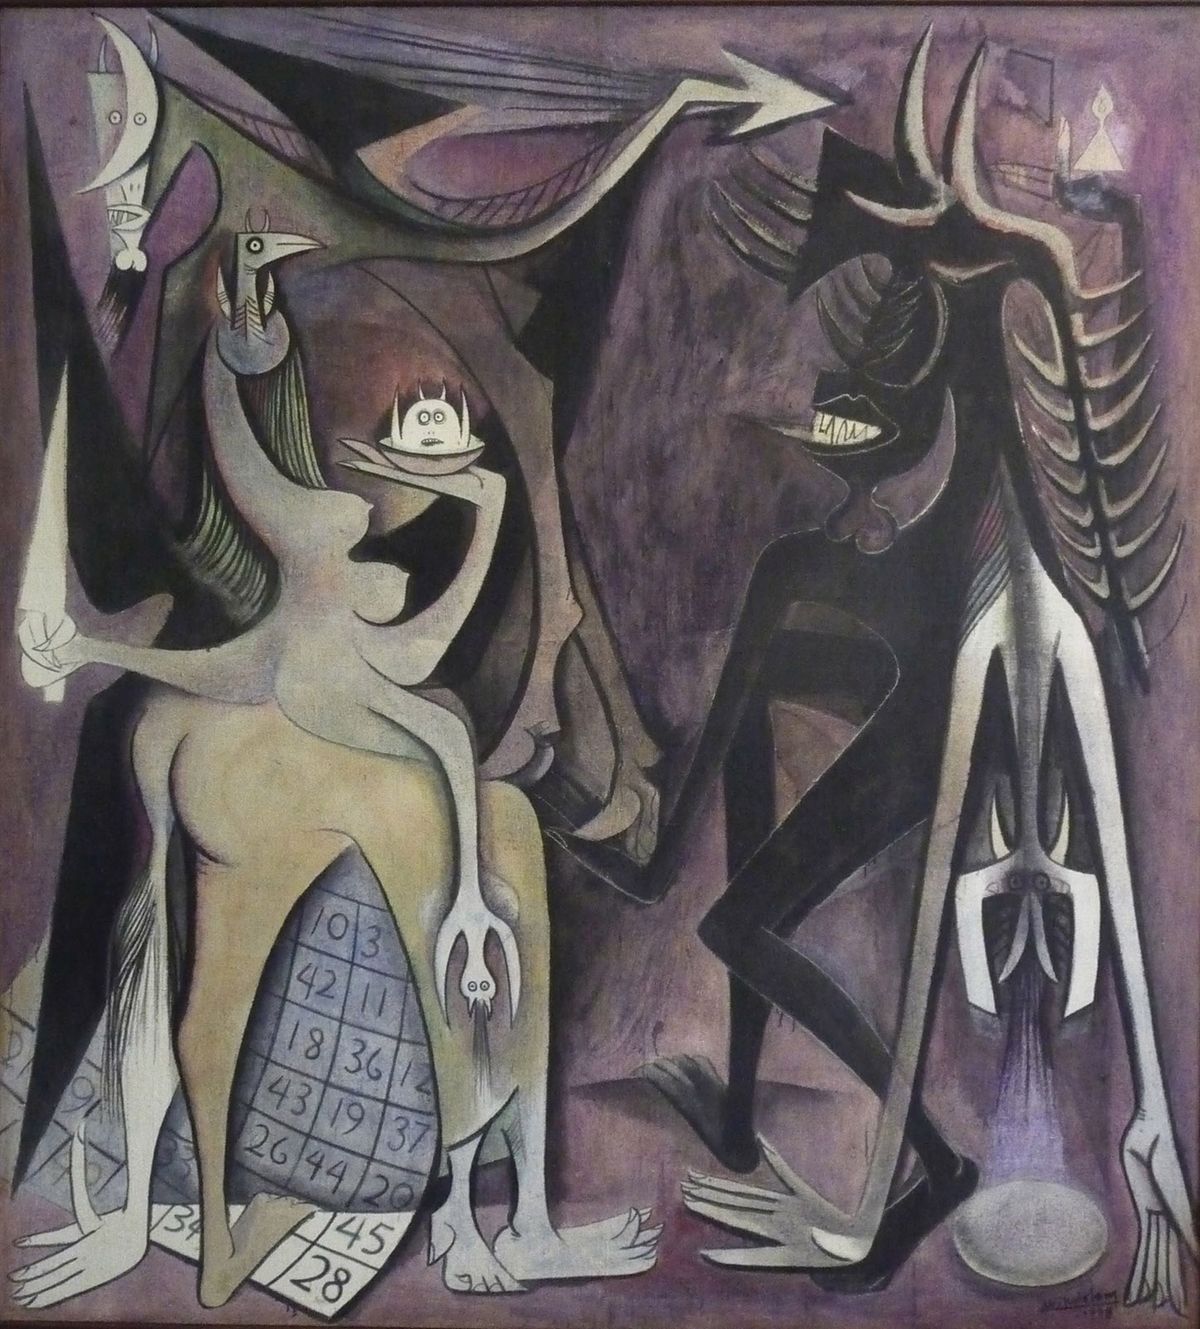 Emperor of the Flies (1948) by the Cuban-born Chinese African Surrealist, Wifredo Lam. Mitter points out that such artists have frequently been confined to the margins and dismissed as derivative by the Western art world